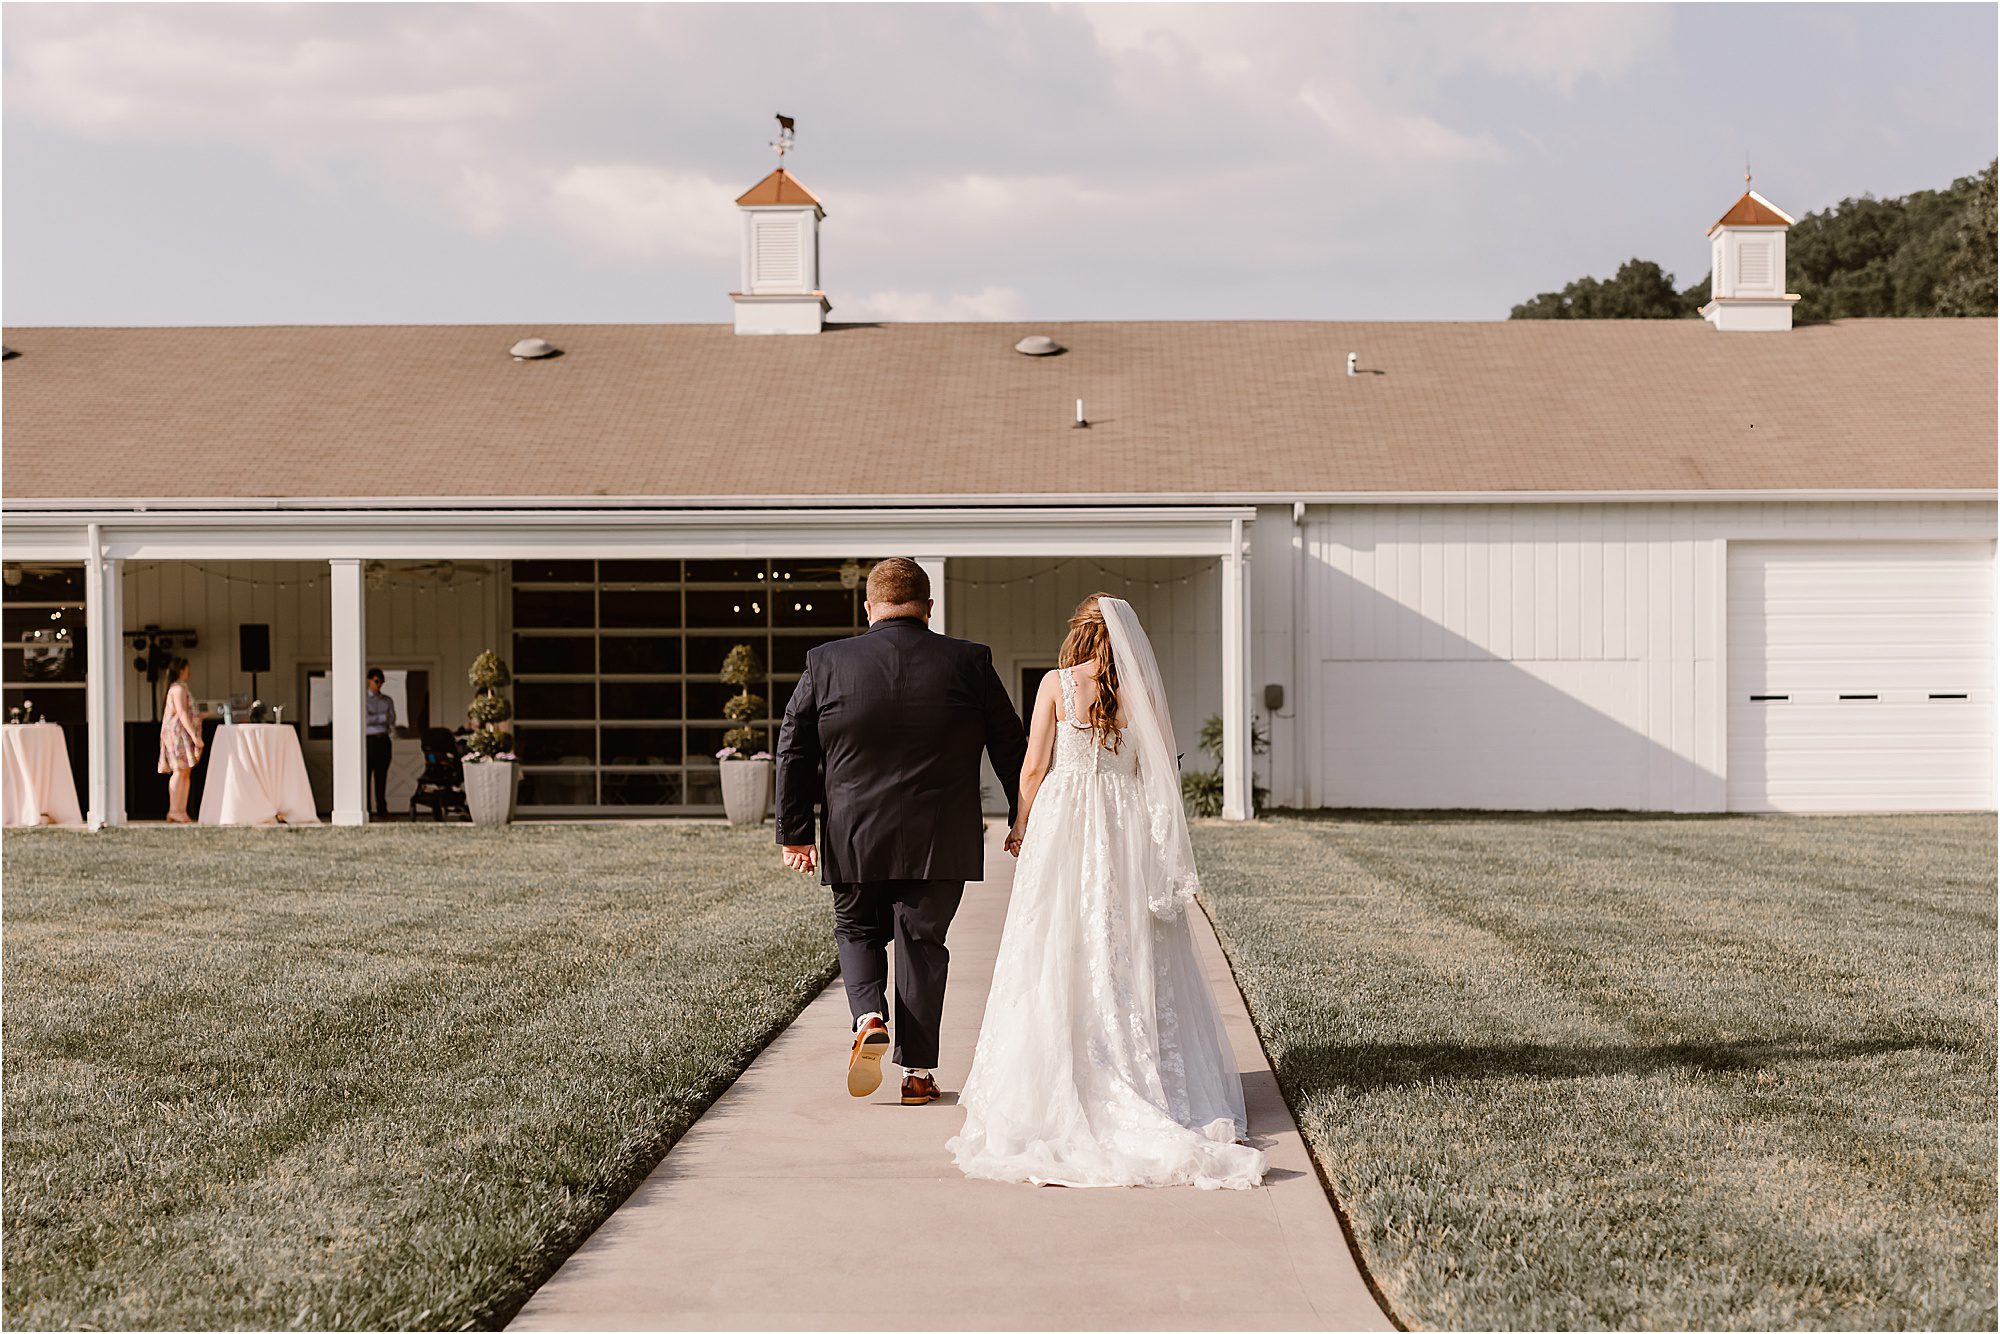 The Carriage House Wedding and Event Venue in East Tennessee